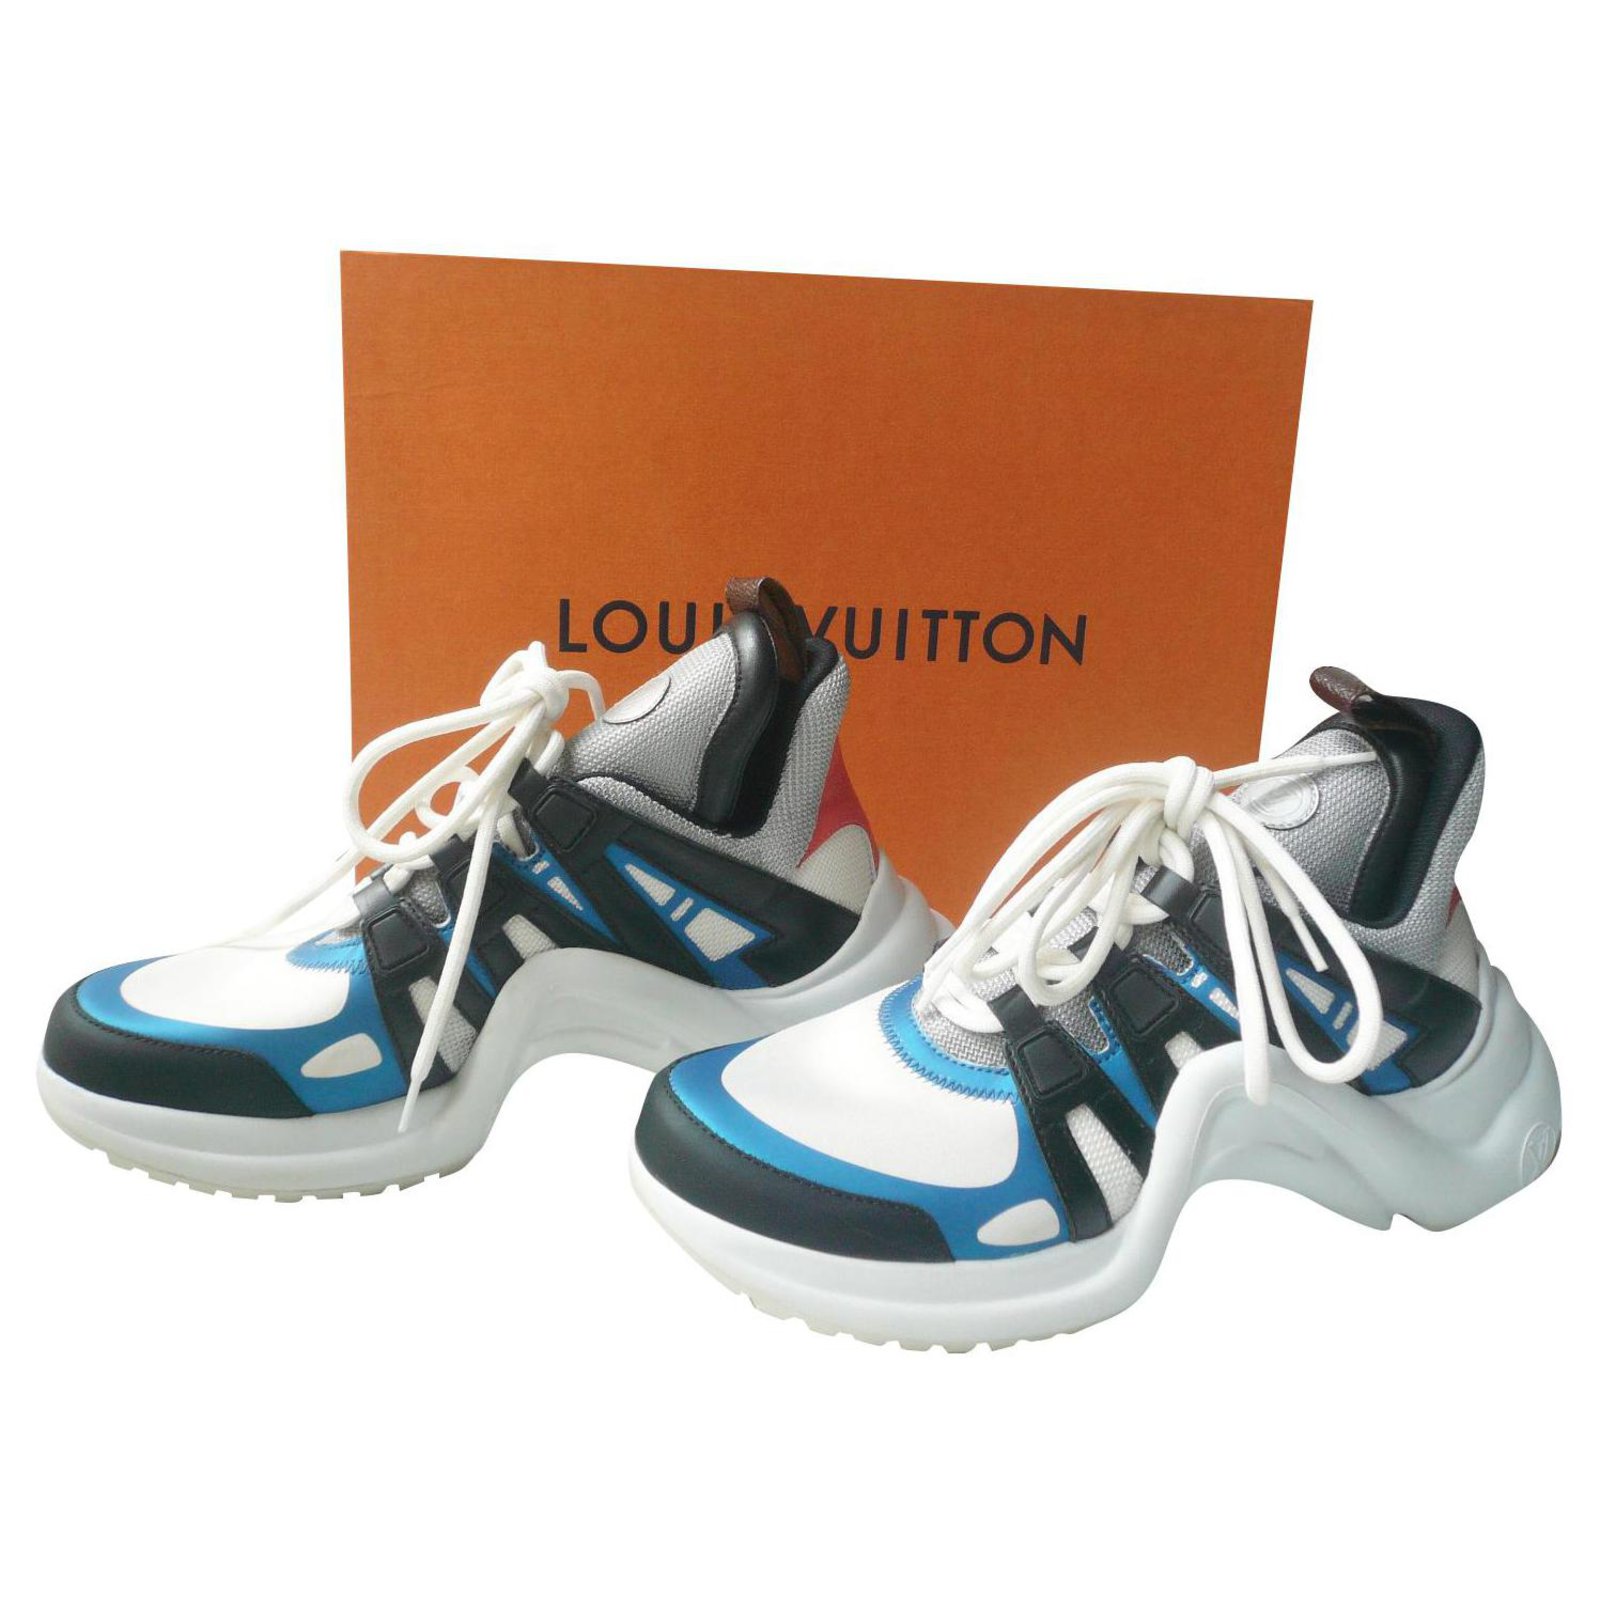 sneakers archlight louis vuittons